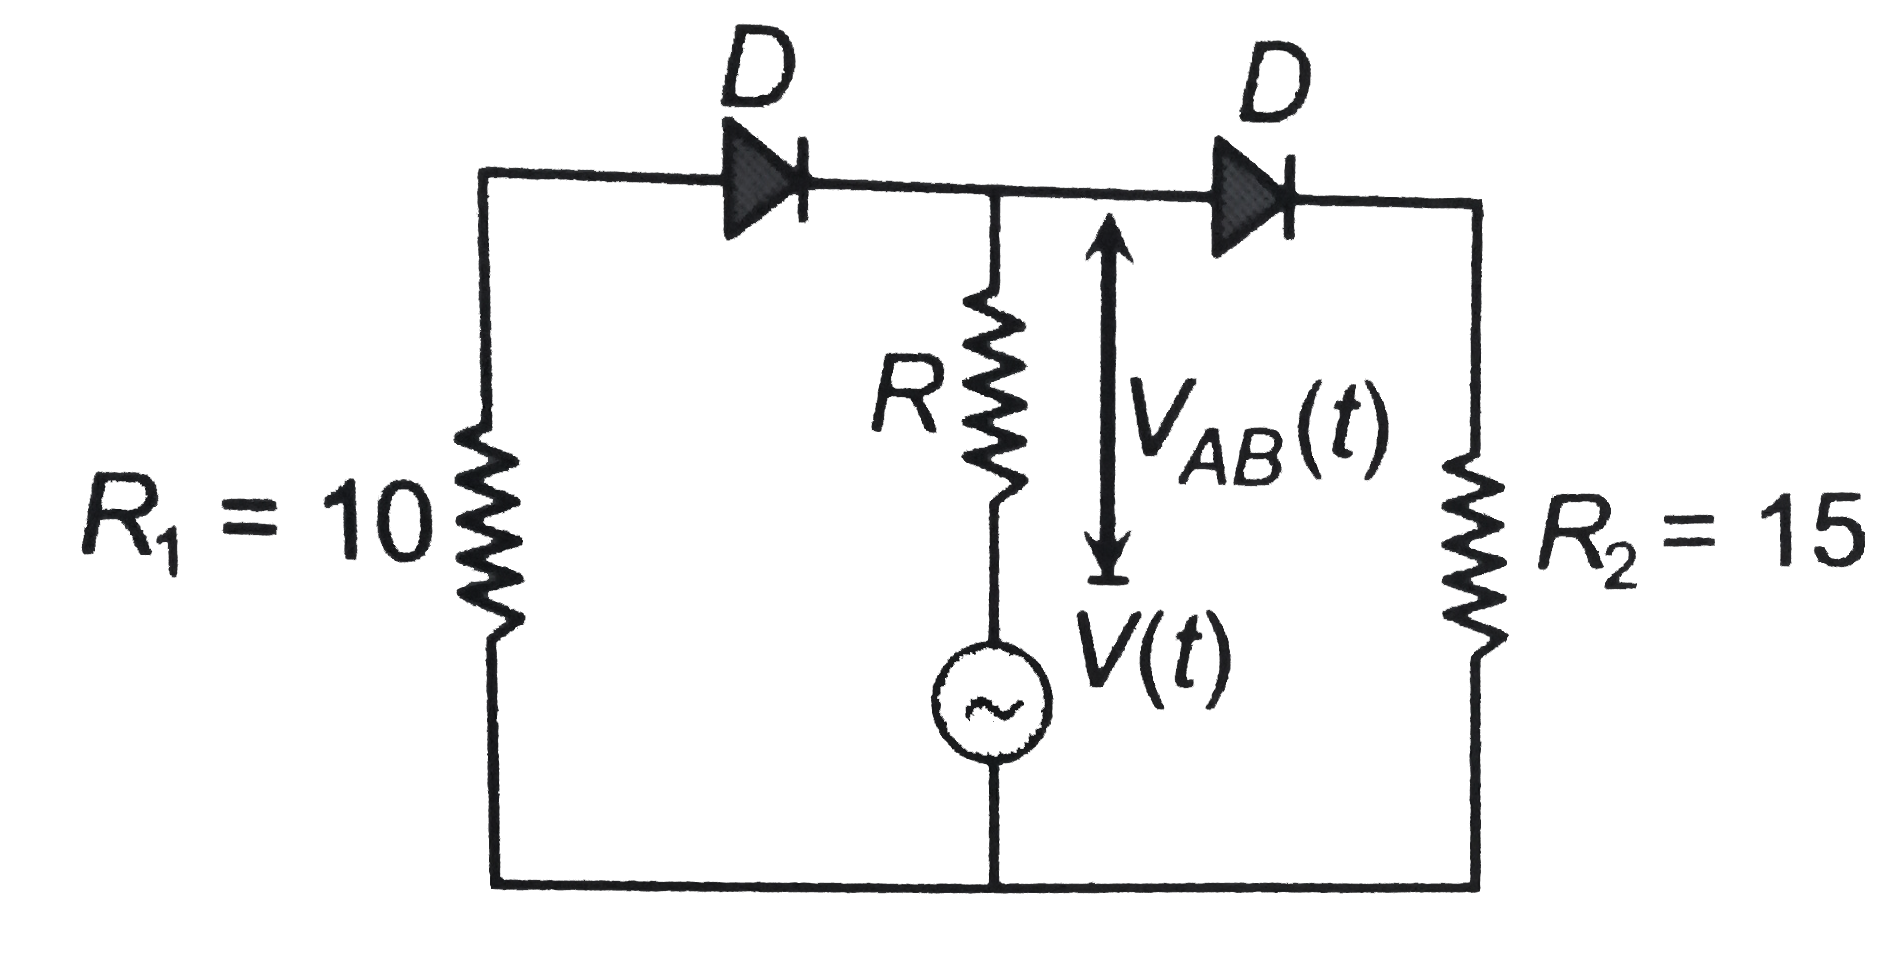 In the circuit given below, V(t) is the sinusiodal voltage source, voltage drop V(AB)(t) across the resistance R is